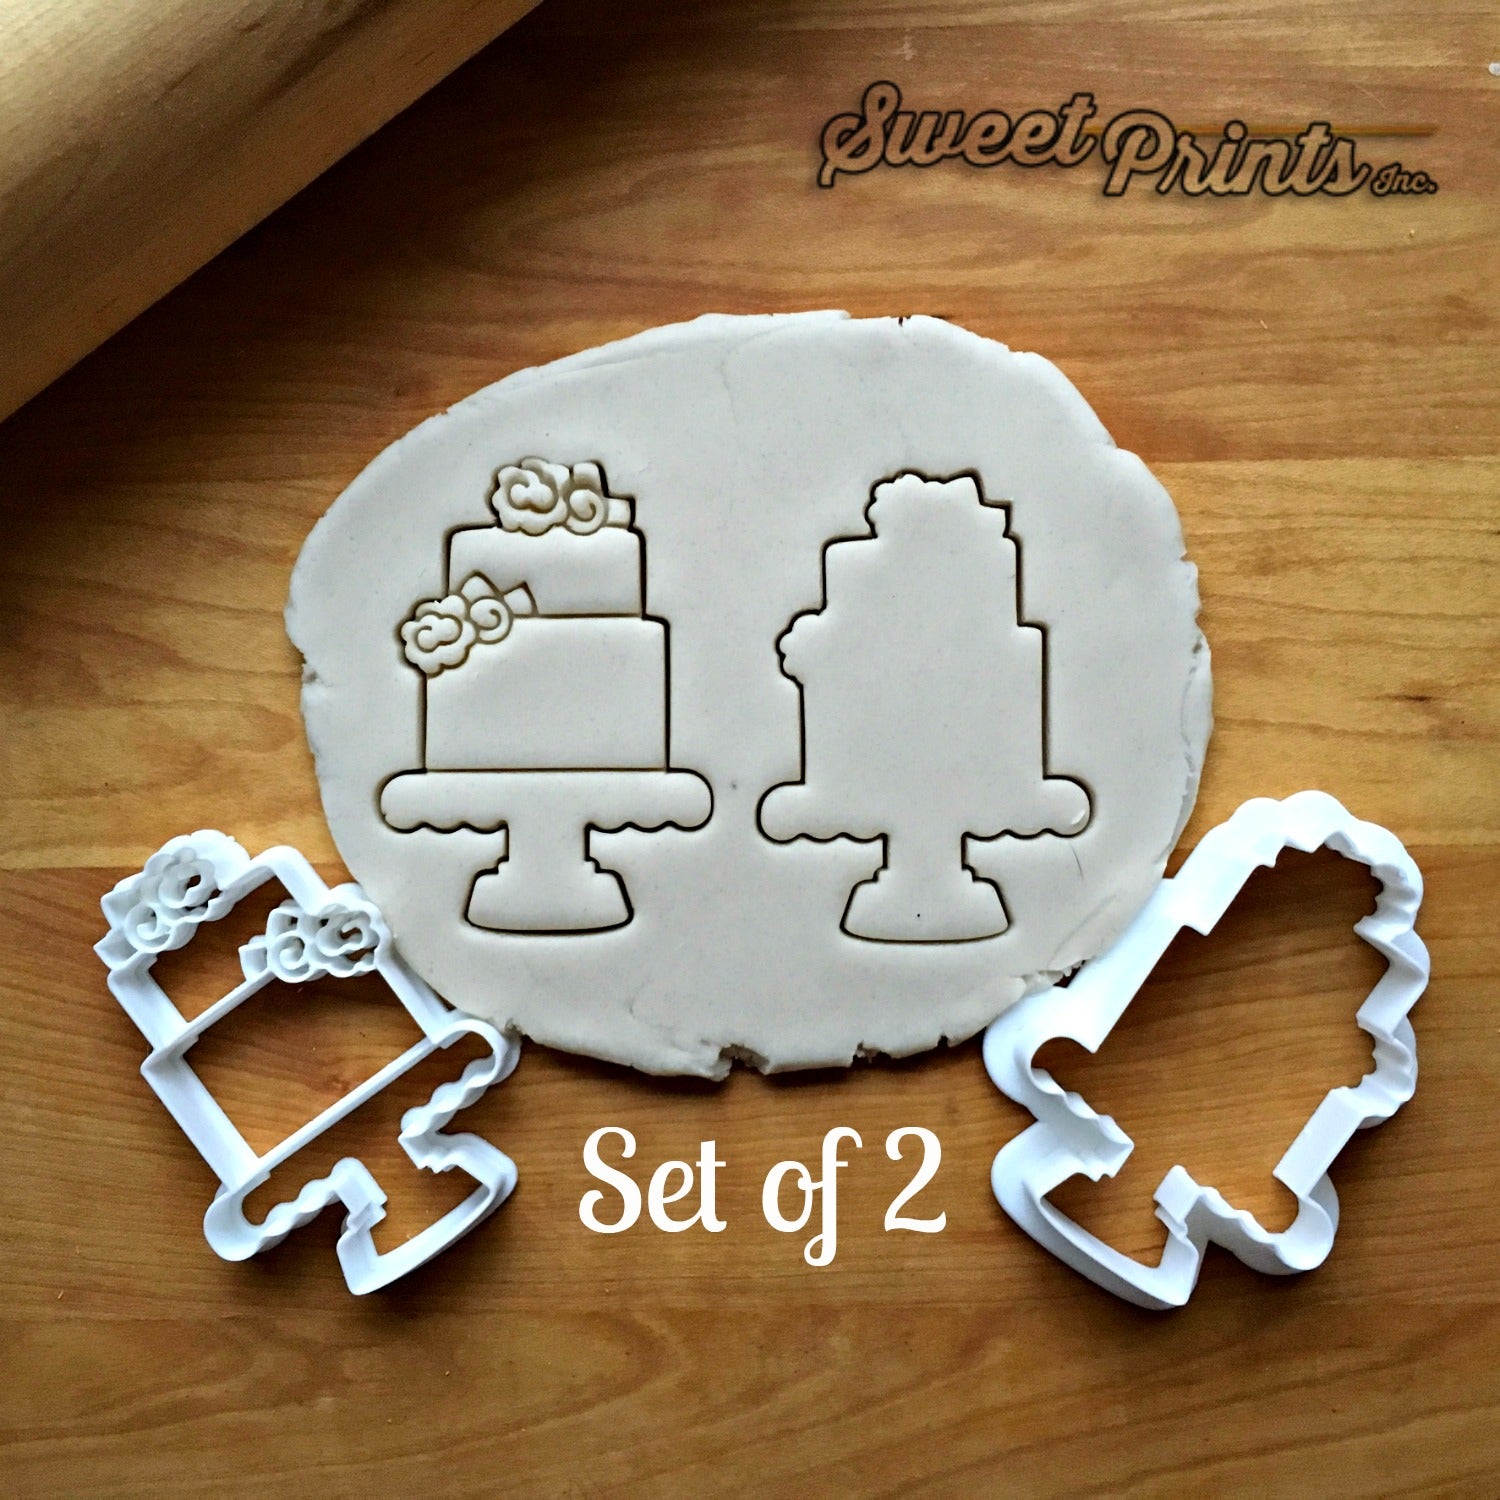 Set of 2 Tiered Cake with Flowers Cookie Cutters/Dishwasher Safe